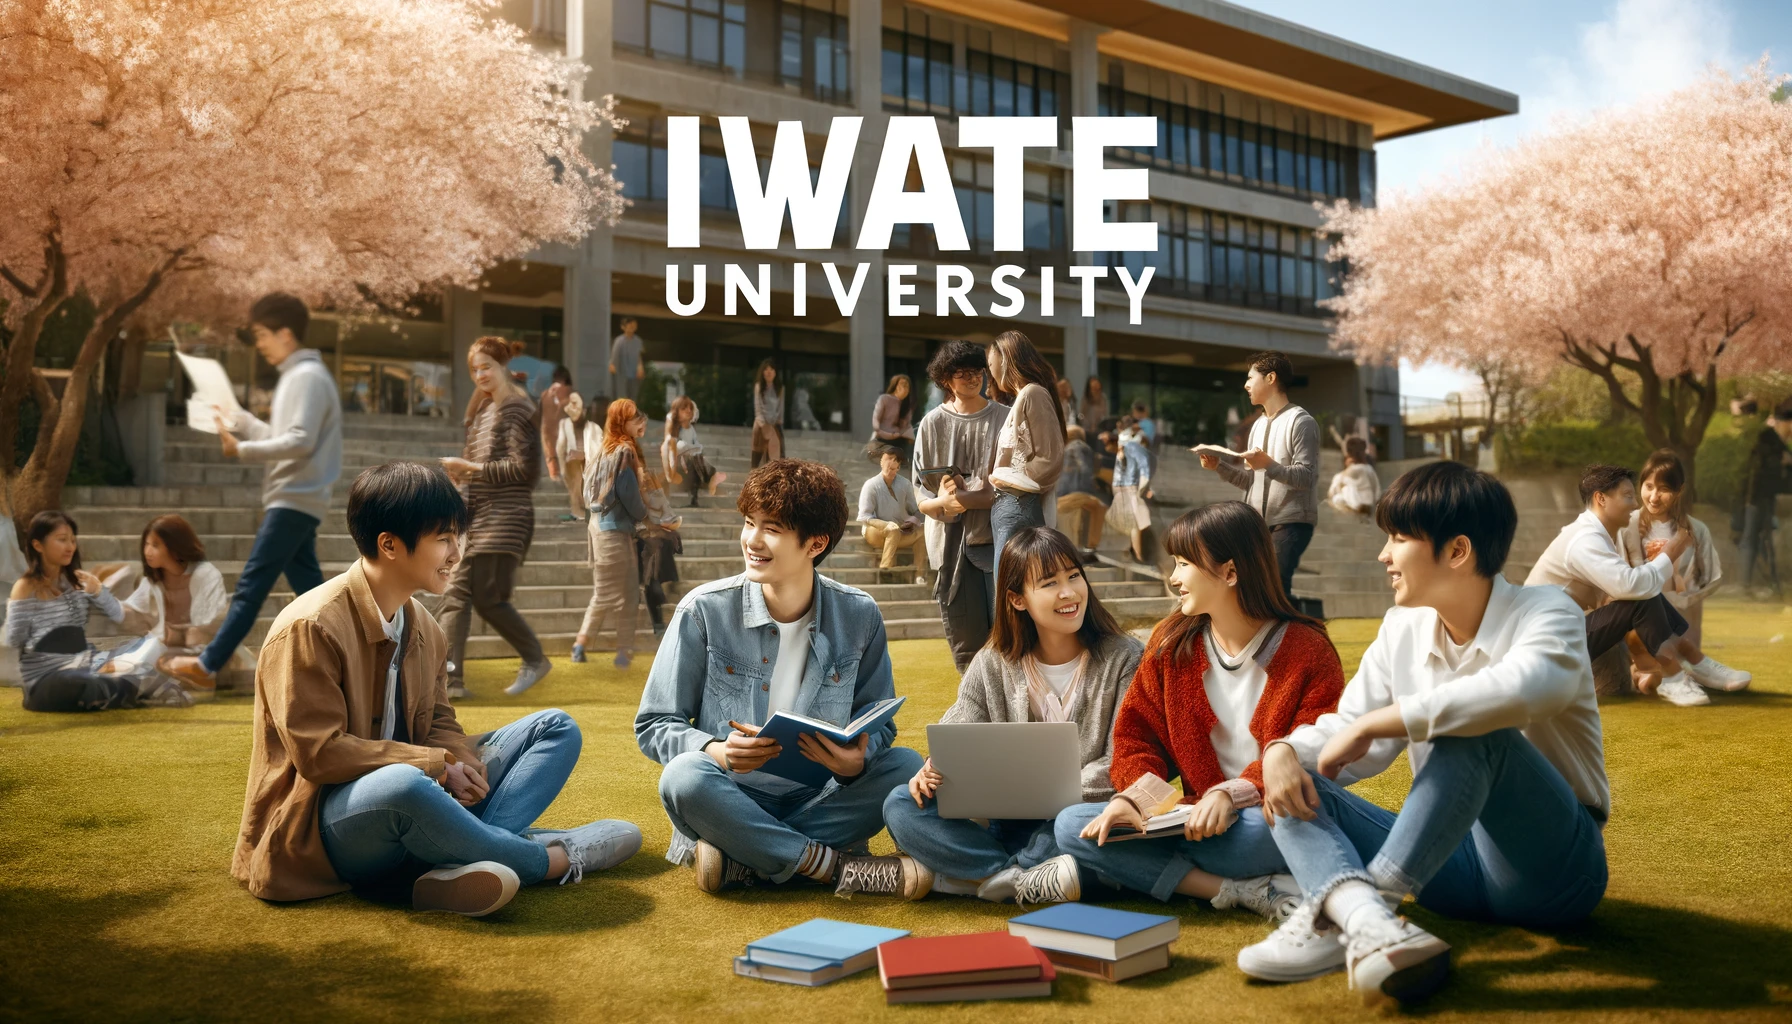 A dynamic scene focused on students at Iwate University, illustrating the university's popularity. The image captures a group of students from diverse backgrounds, actively engaged in a lively discussion outdoors. They are sitting on the grass with books and laptops, under the shade of cherry blossom trees. Some students are walking by, chatting and laughing. The setting includes modern campus buildings in the background. Prominently, the word 'IWATE' is displayed in bold English letters across the top of the image, highlighting the university's identity.